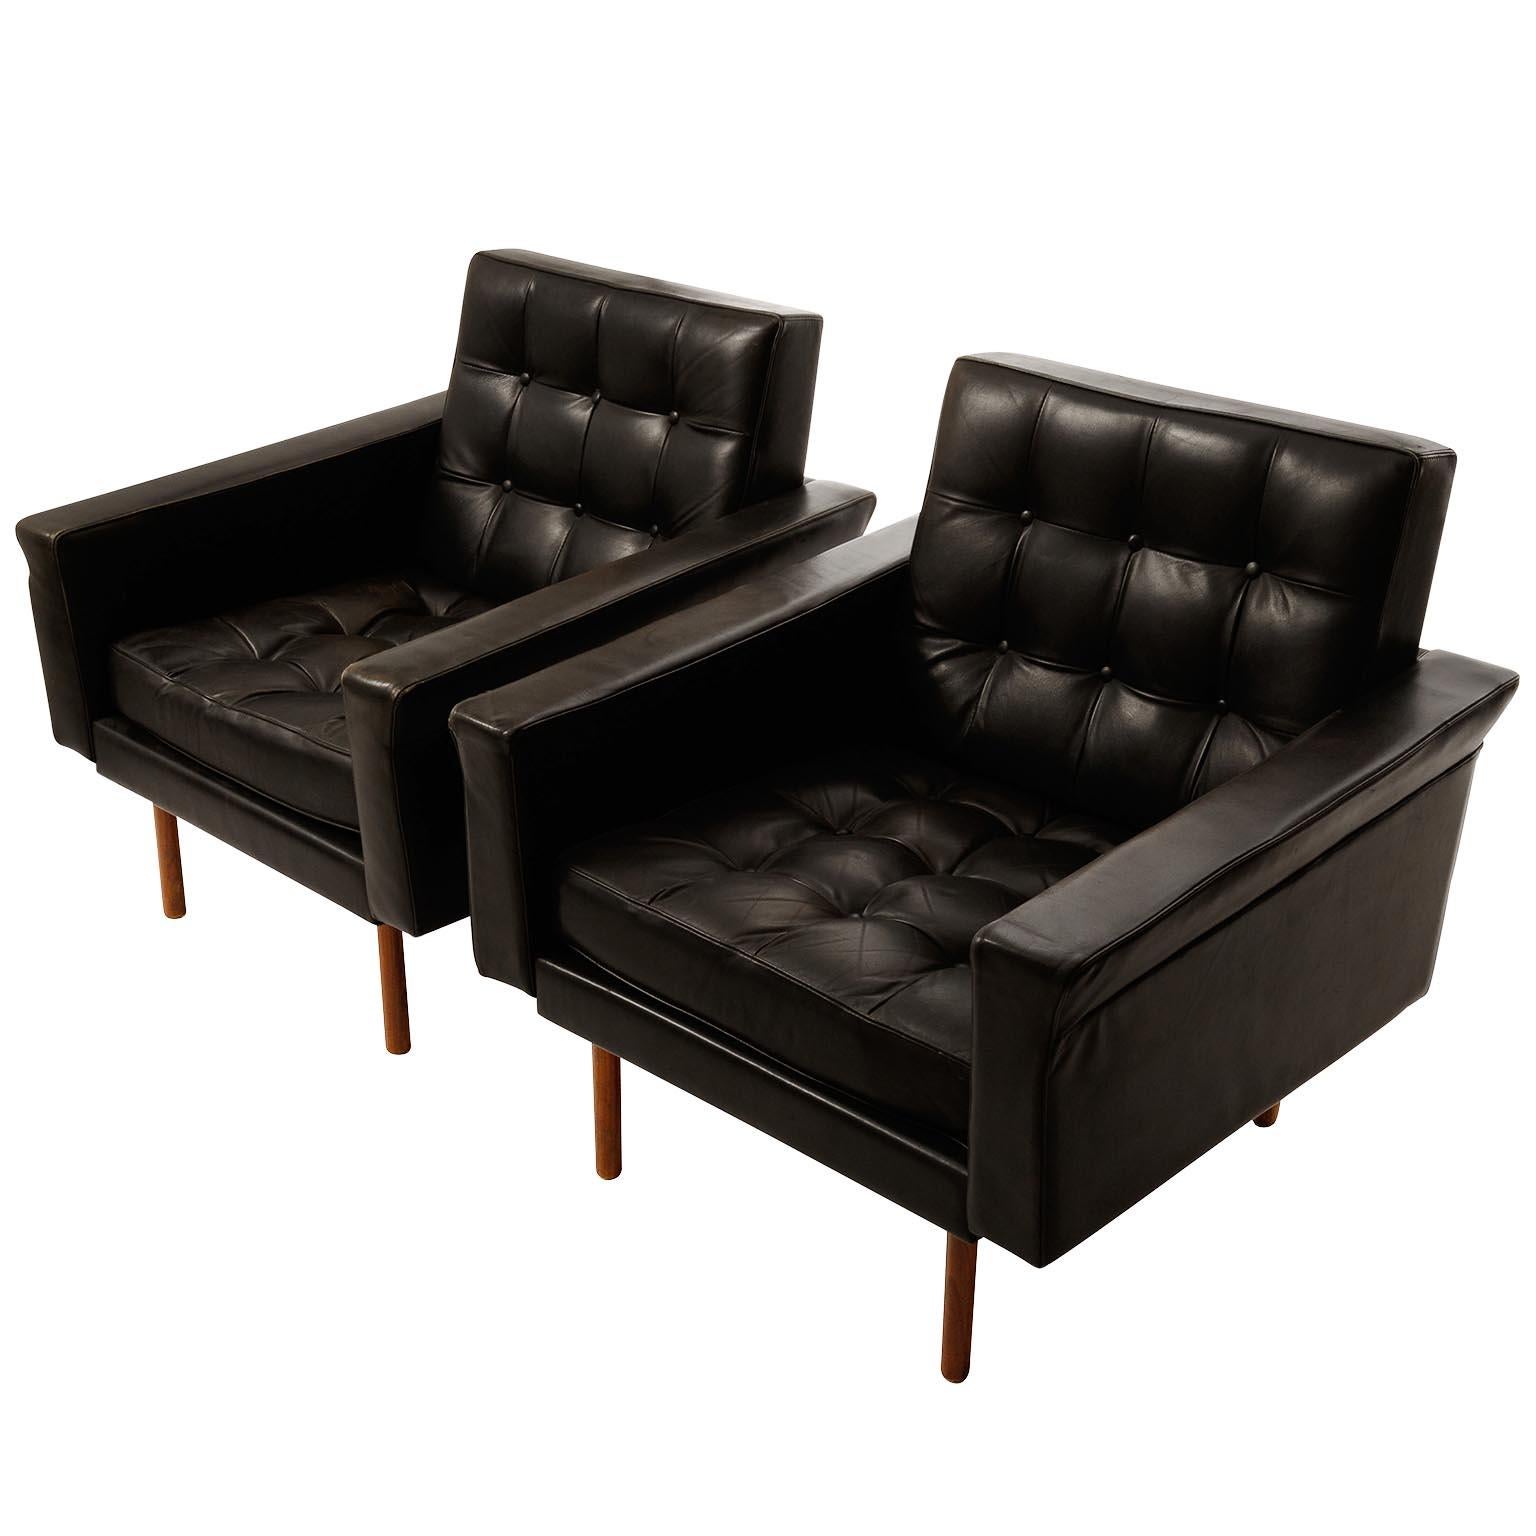 A pair of armchairs with tufted black leather and teak wood legs designed by Prof. Johannes Spalt for Wittmann, Austria, manufactured in midcentury, circa 1960.
The thin legs create the effect of almost free floating pieces.
The chairs are in very